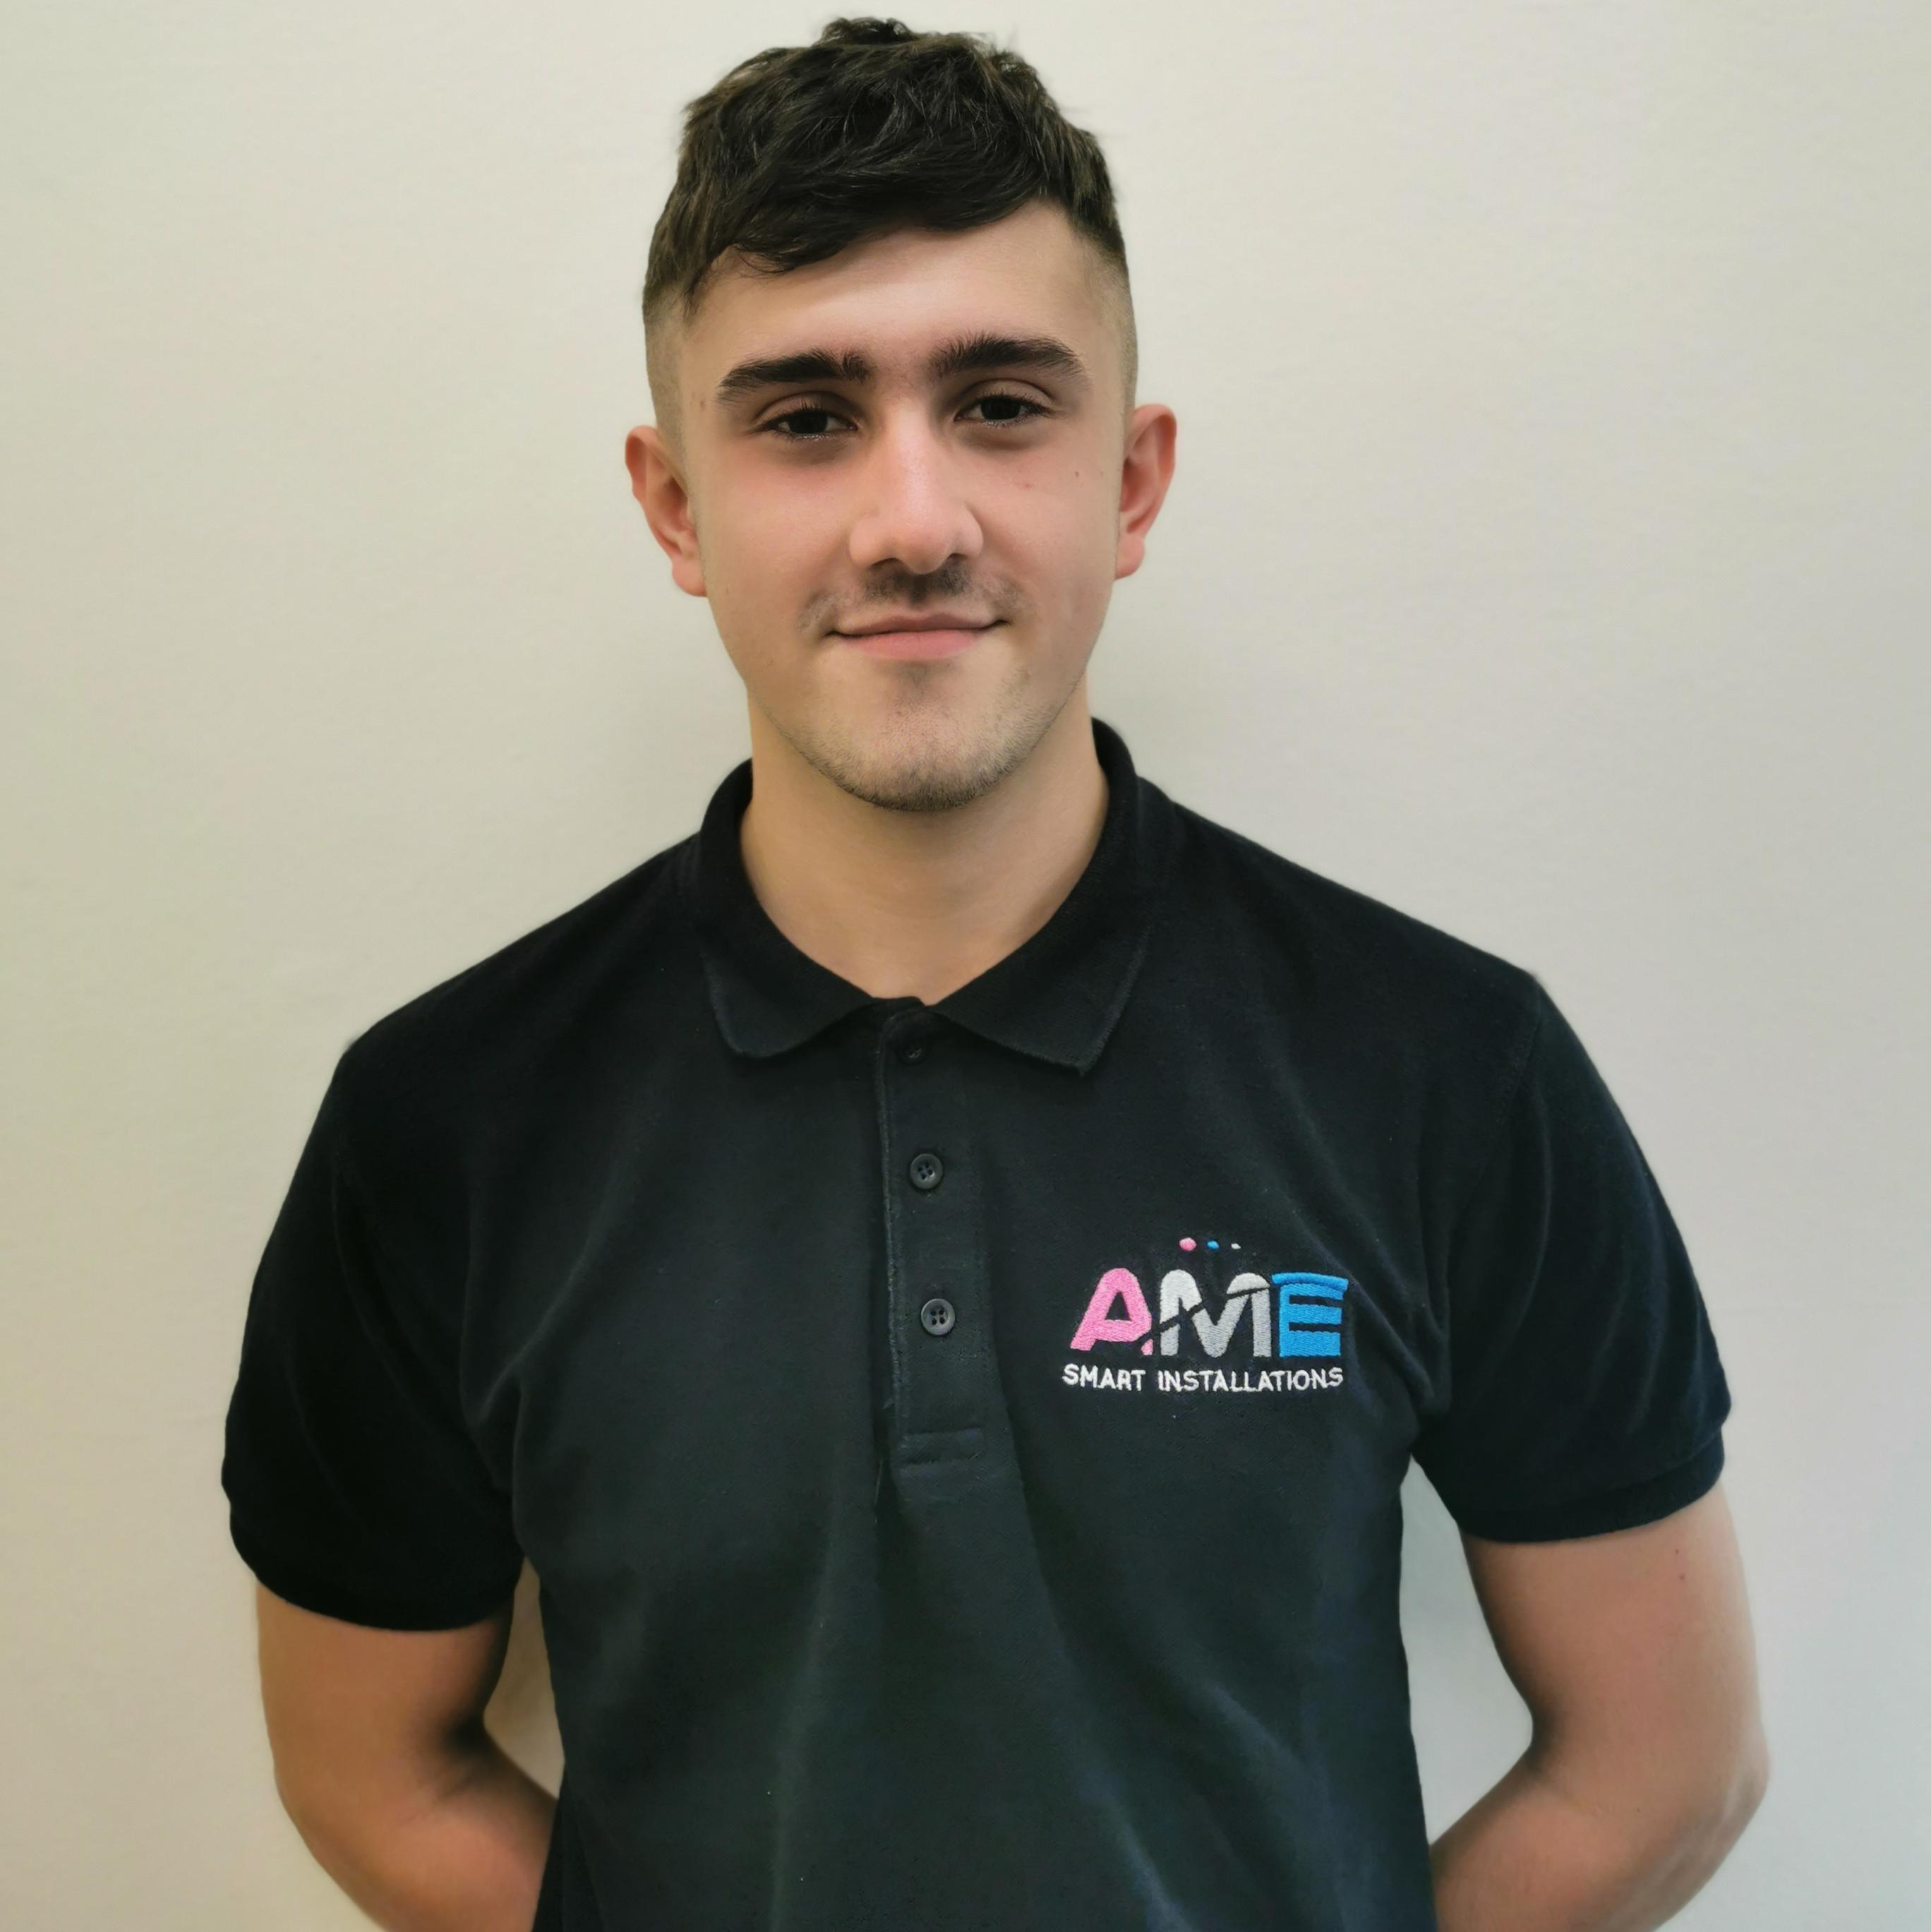 Ryan the apprentice electrician for AME Smart Installations in Barnsley